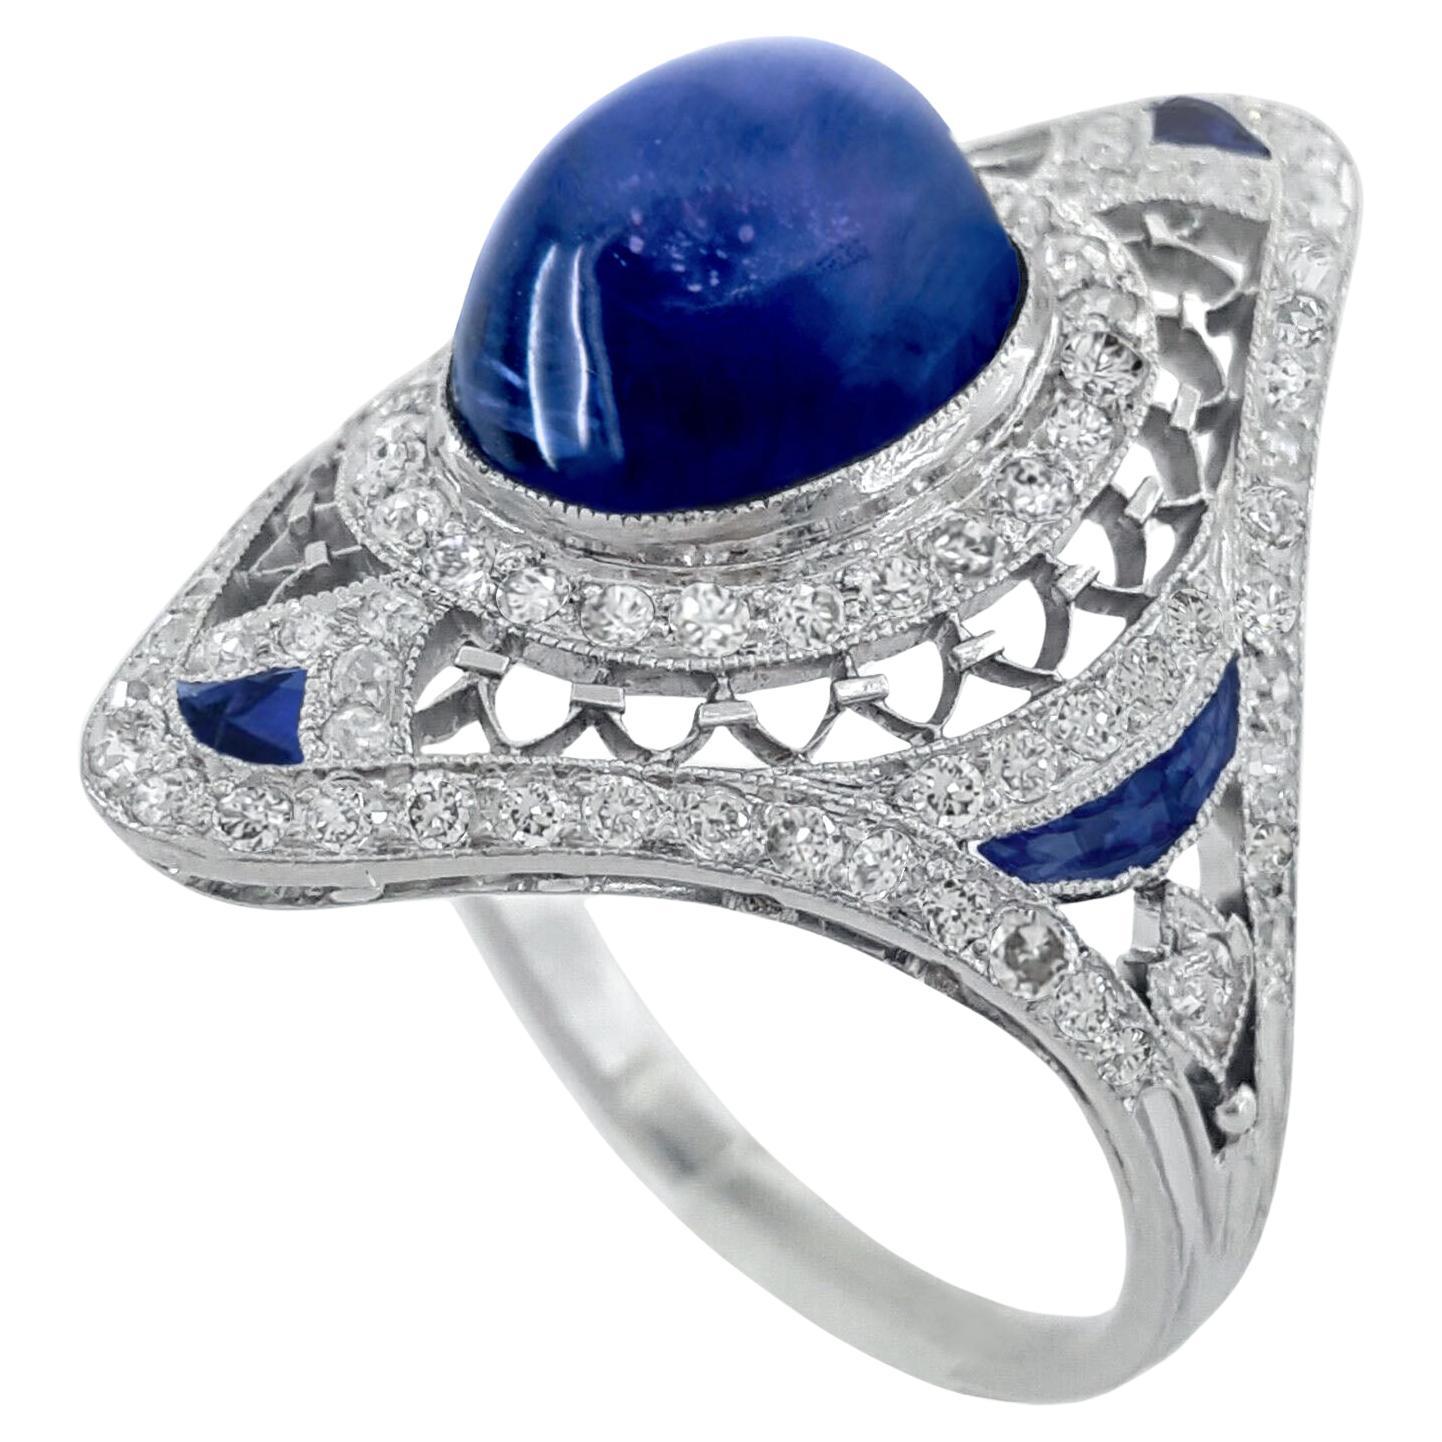 Sugarloaf Cabochon Blue Sapphire & Old European Cut Diamond  Ring For Sale